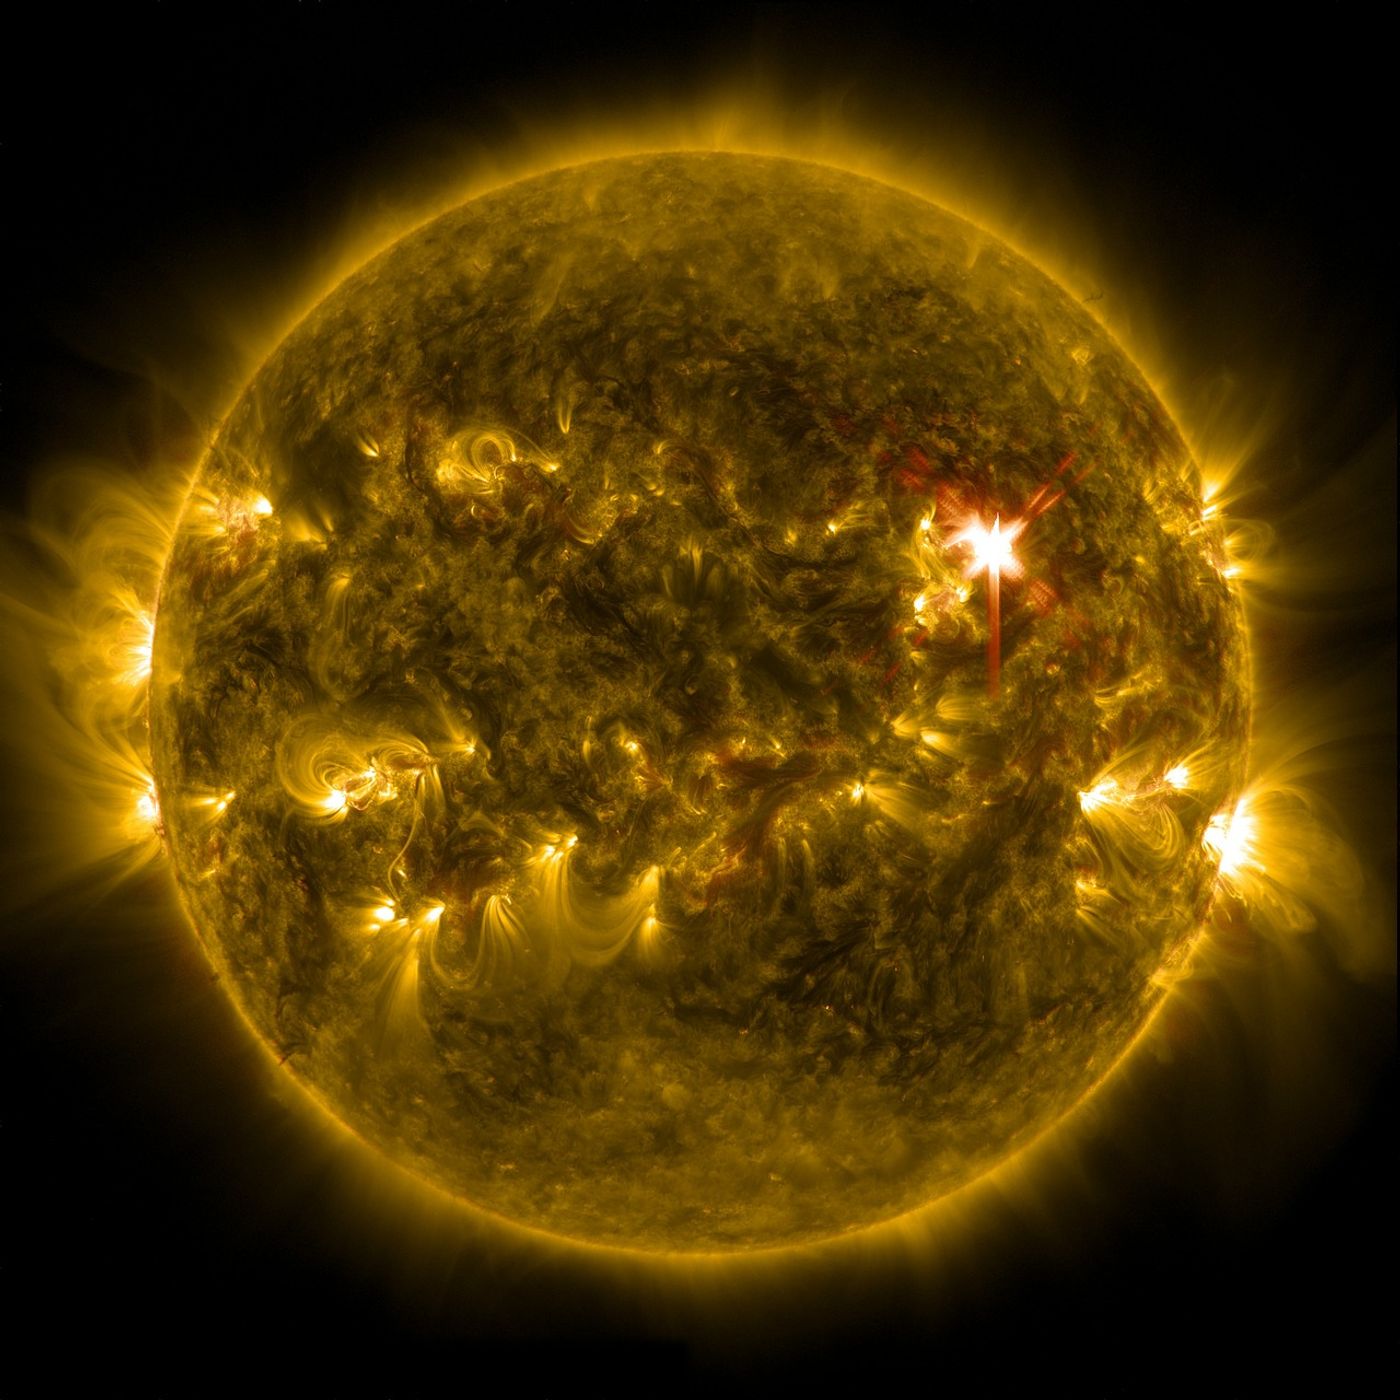 The Sun is a giant glowing sphere of nuclear fusion.